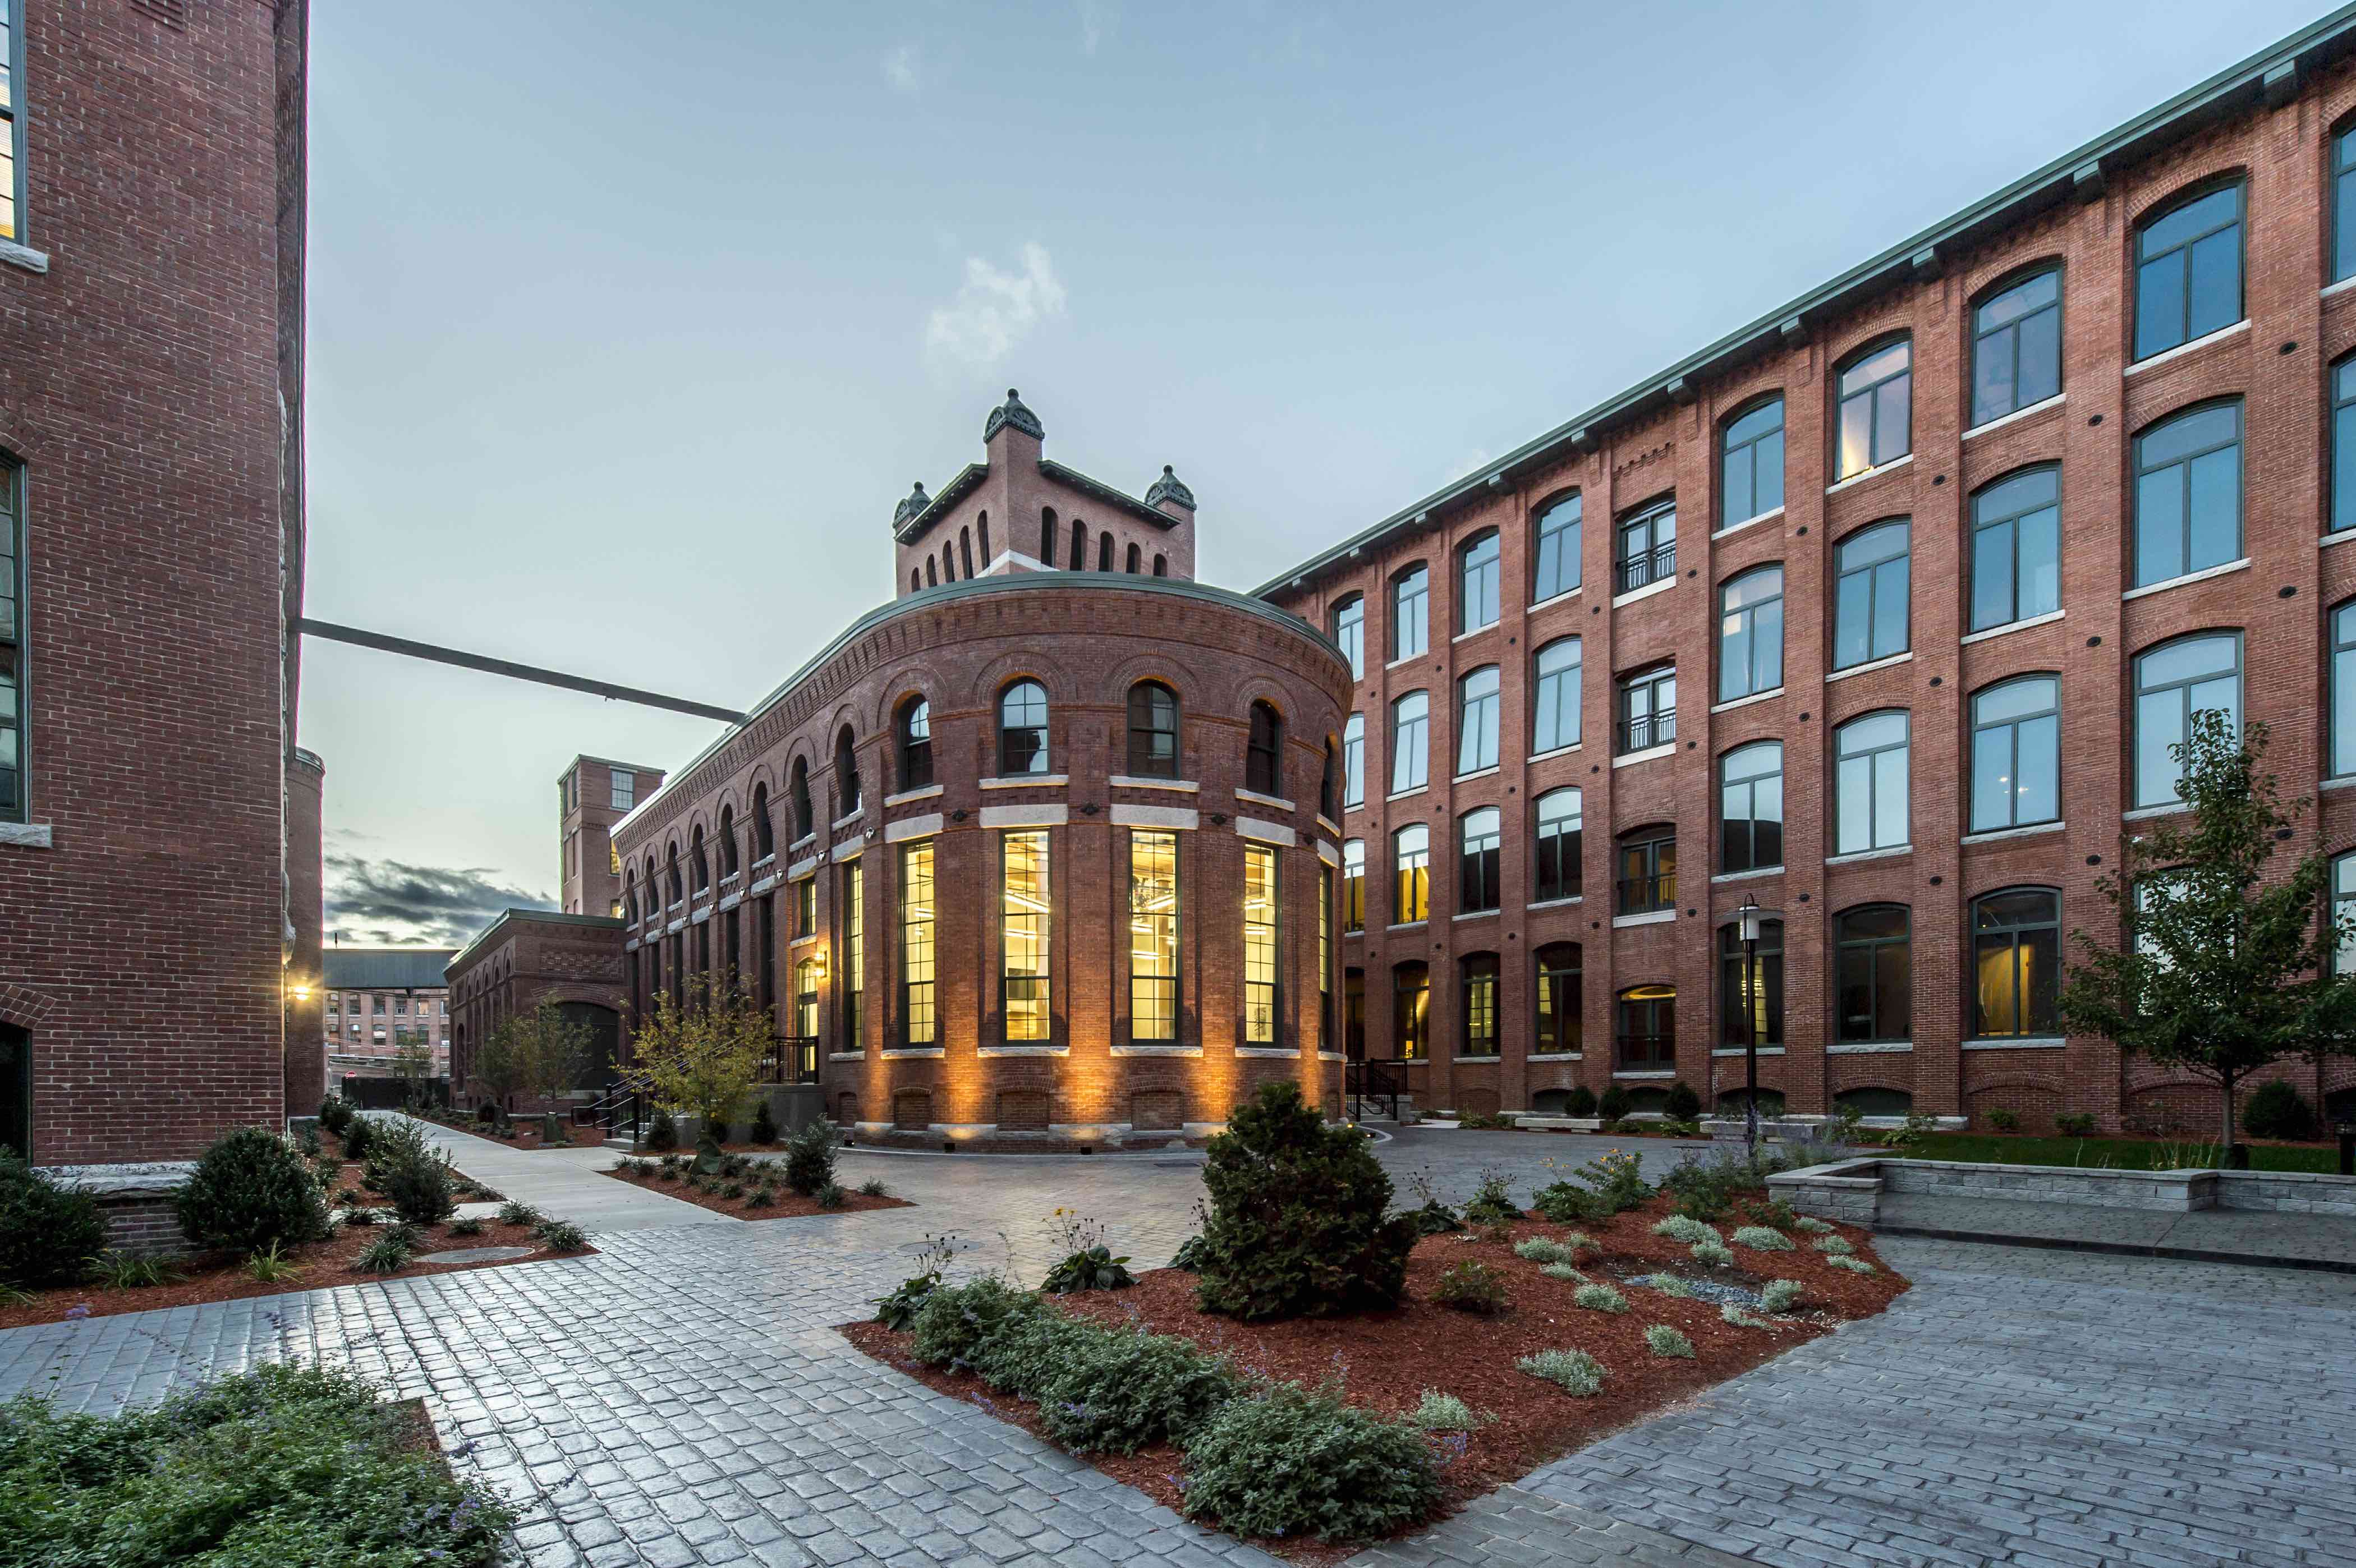 TAT has given new life to scores of former industrial buildings, catalyzing reinvestment in many postindustrial cities (Photo Credit: Gregg Shupe)